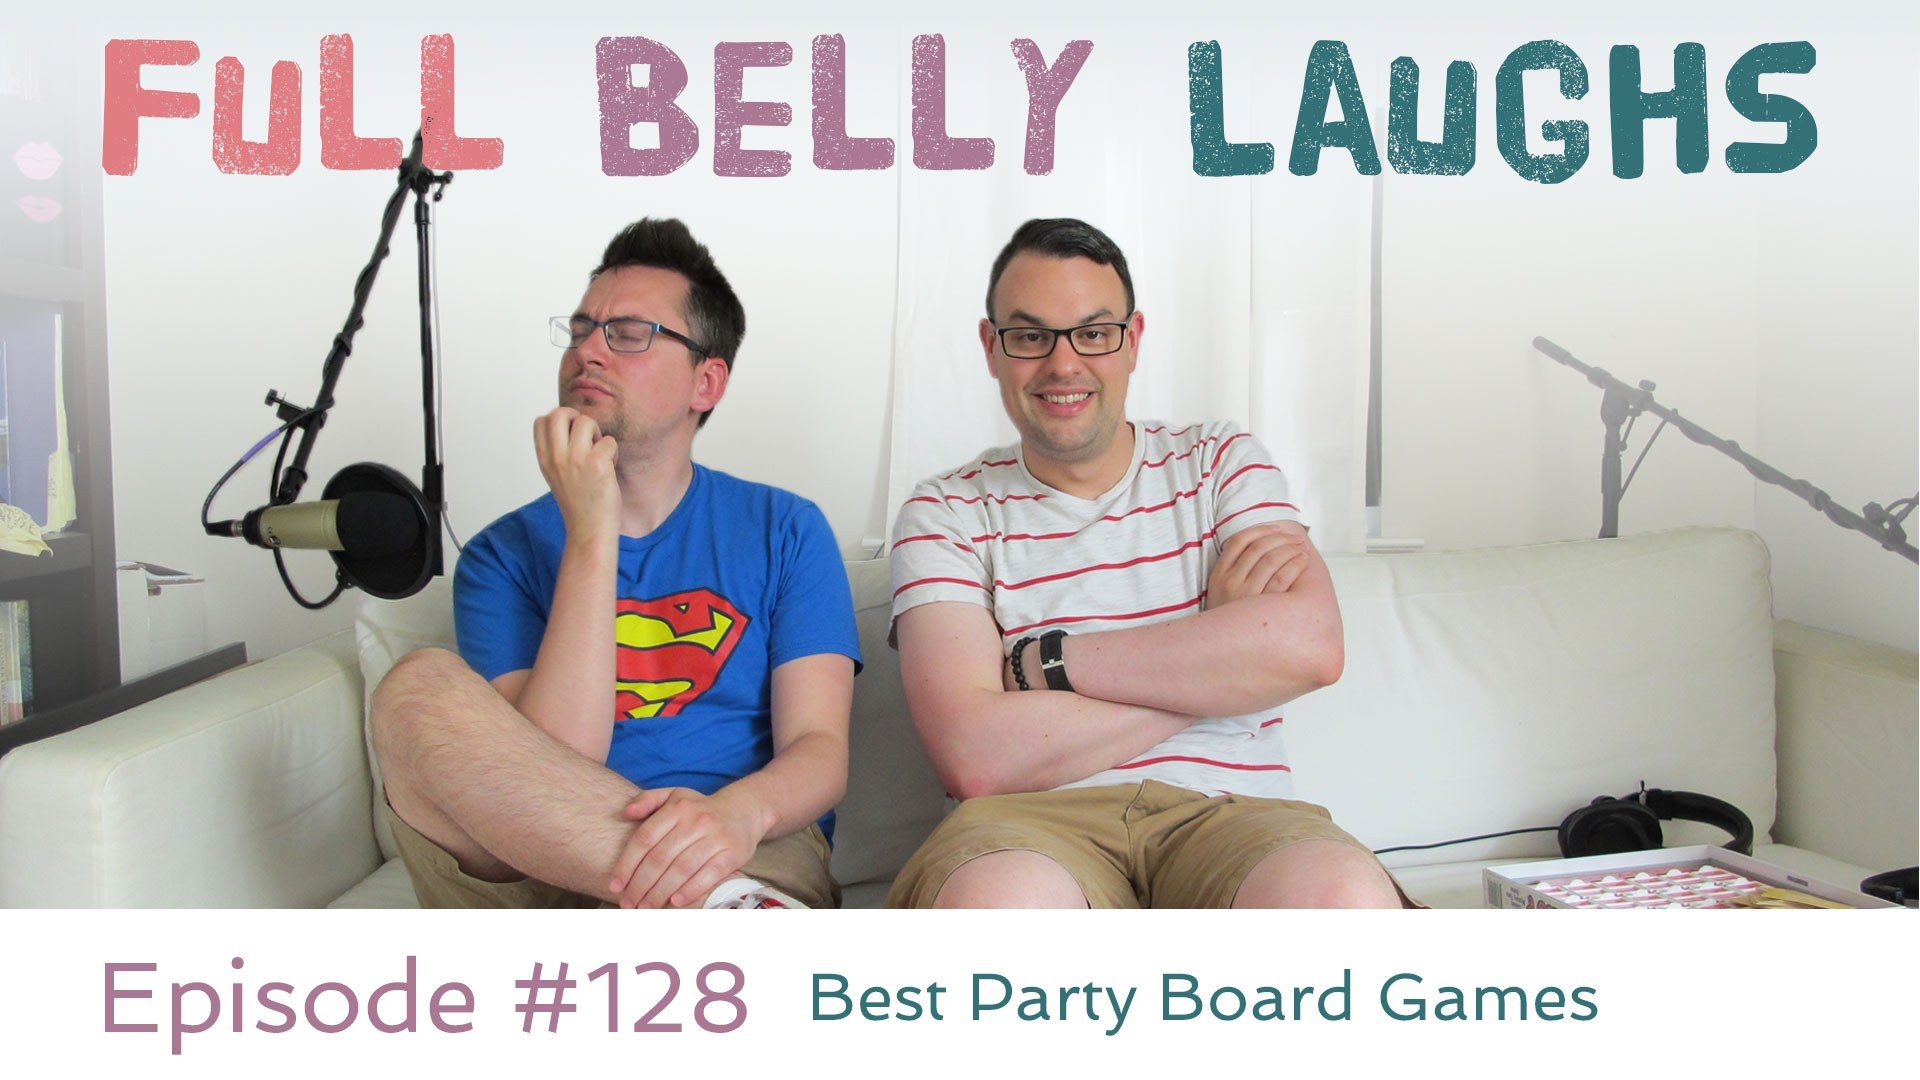 full belly laughs podcast episode 128 best party board games audio artwork